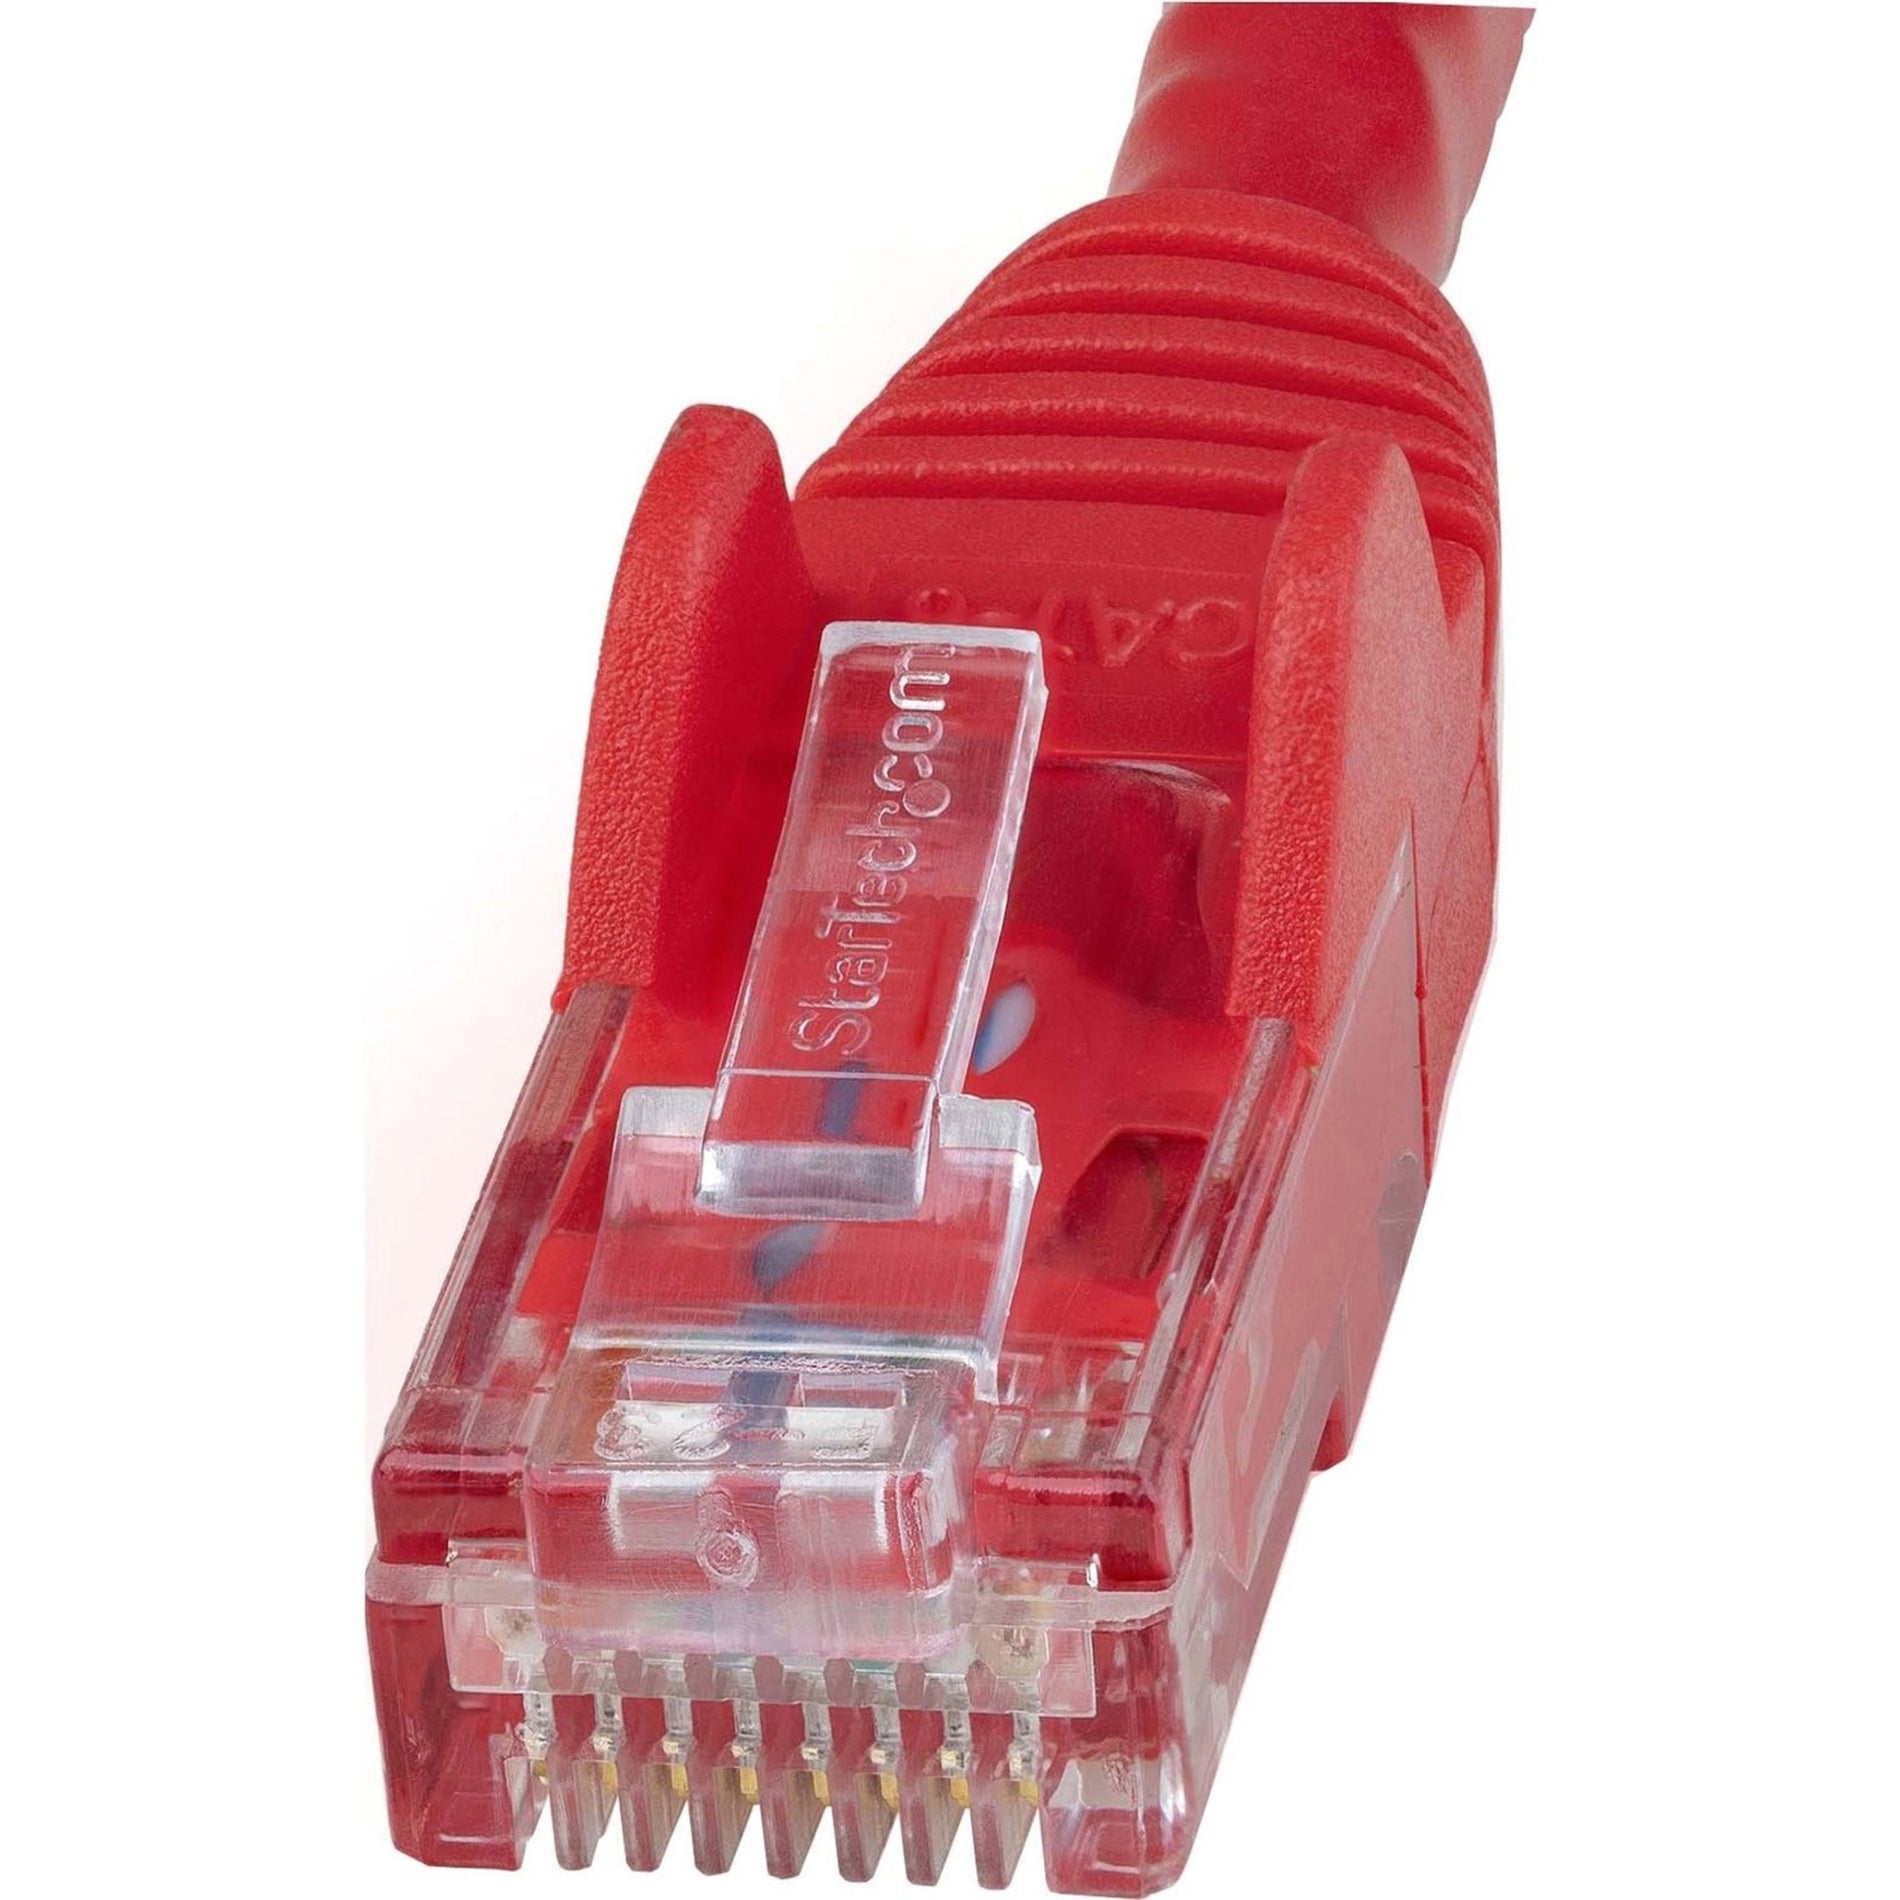 StarTech.com N6PATCH50RD 50 ft Red Snagless Cat6 UTP Patch Cable - ETL Verified, Lifetime Warranty, 10 Gbit/s Data Transfer Rate